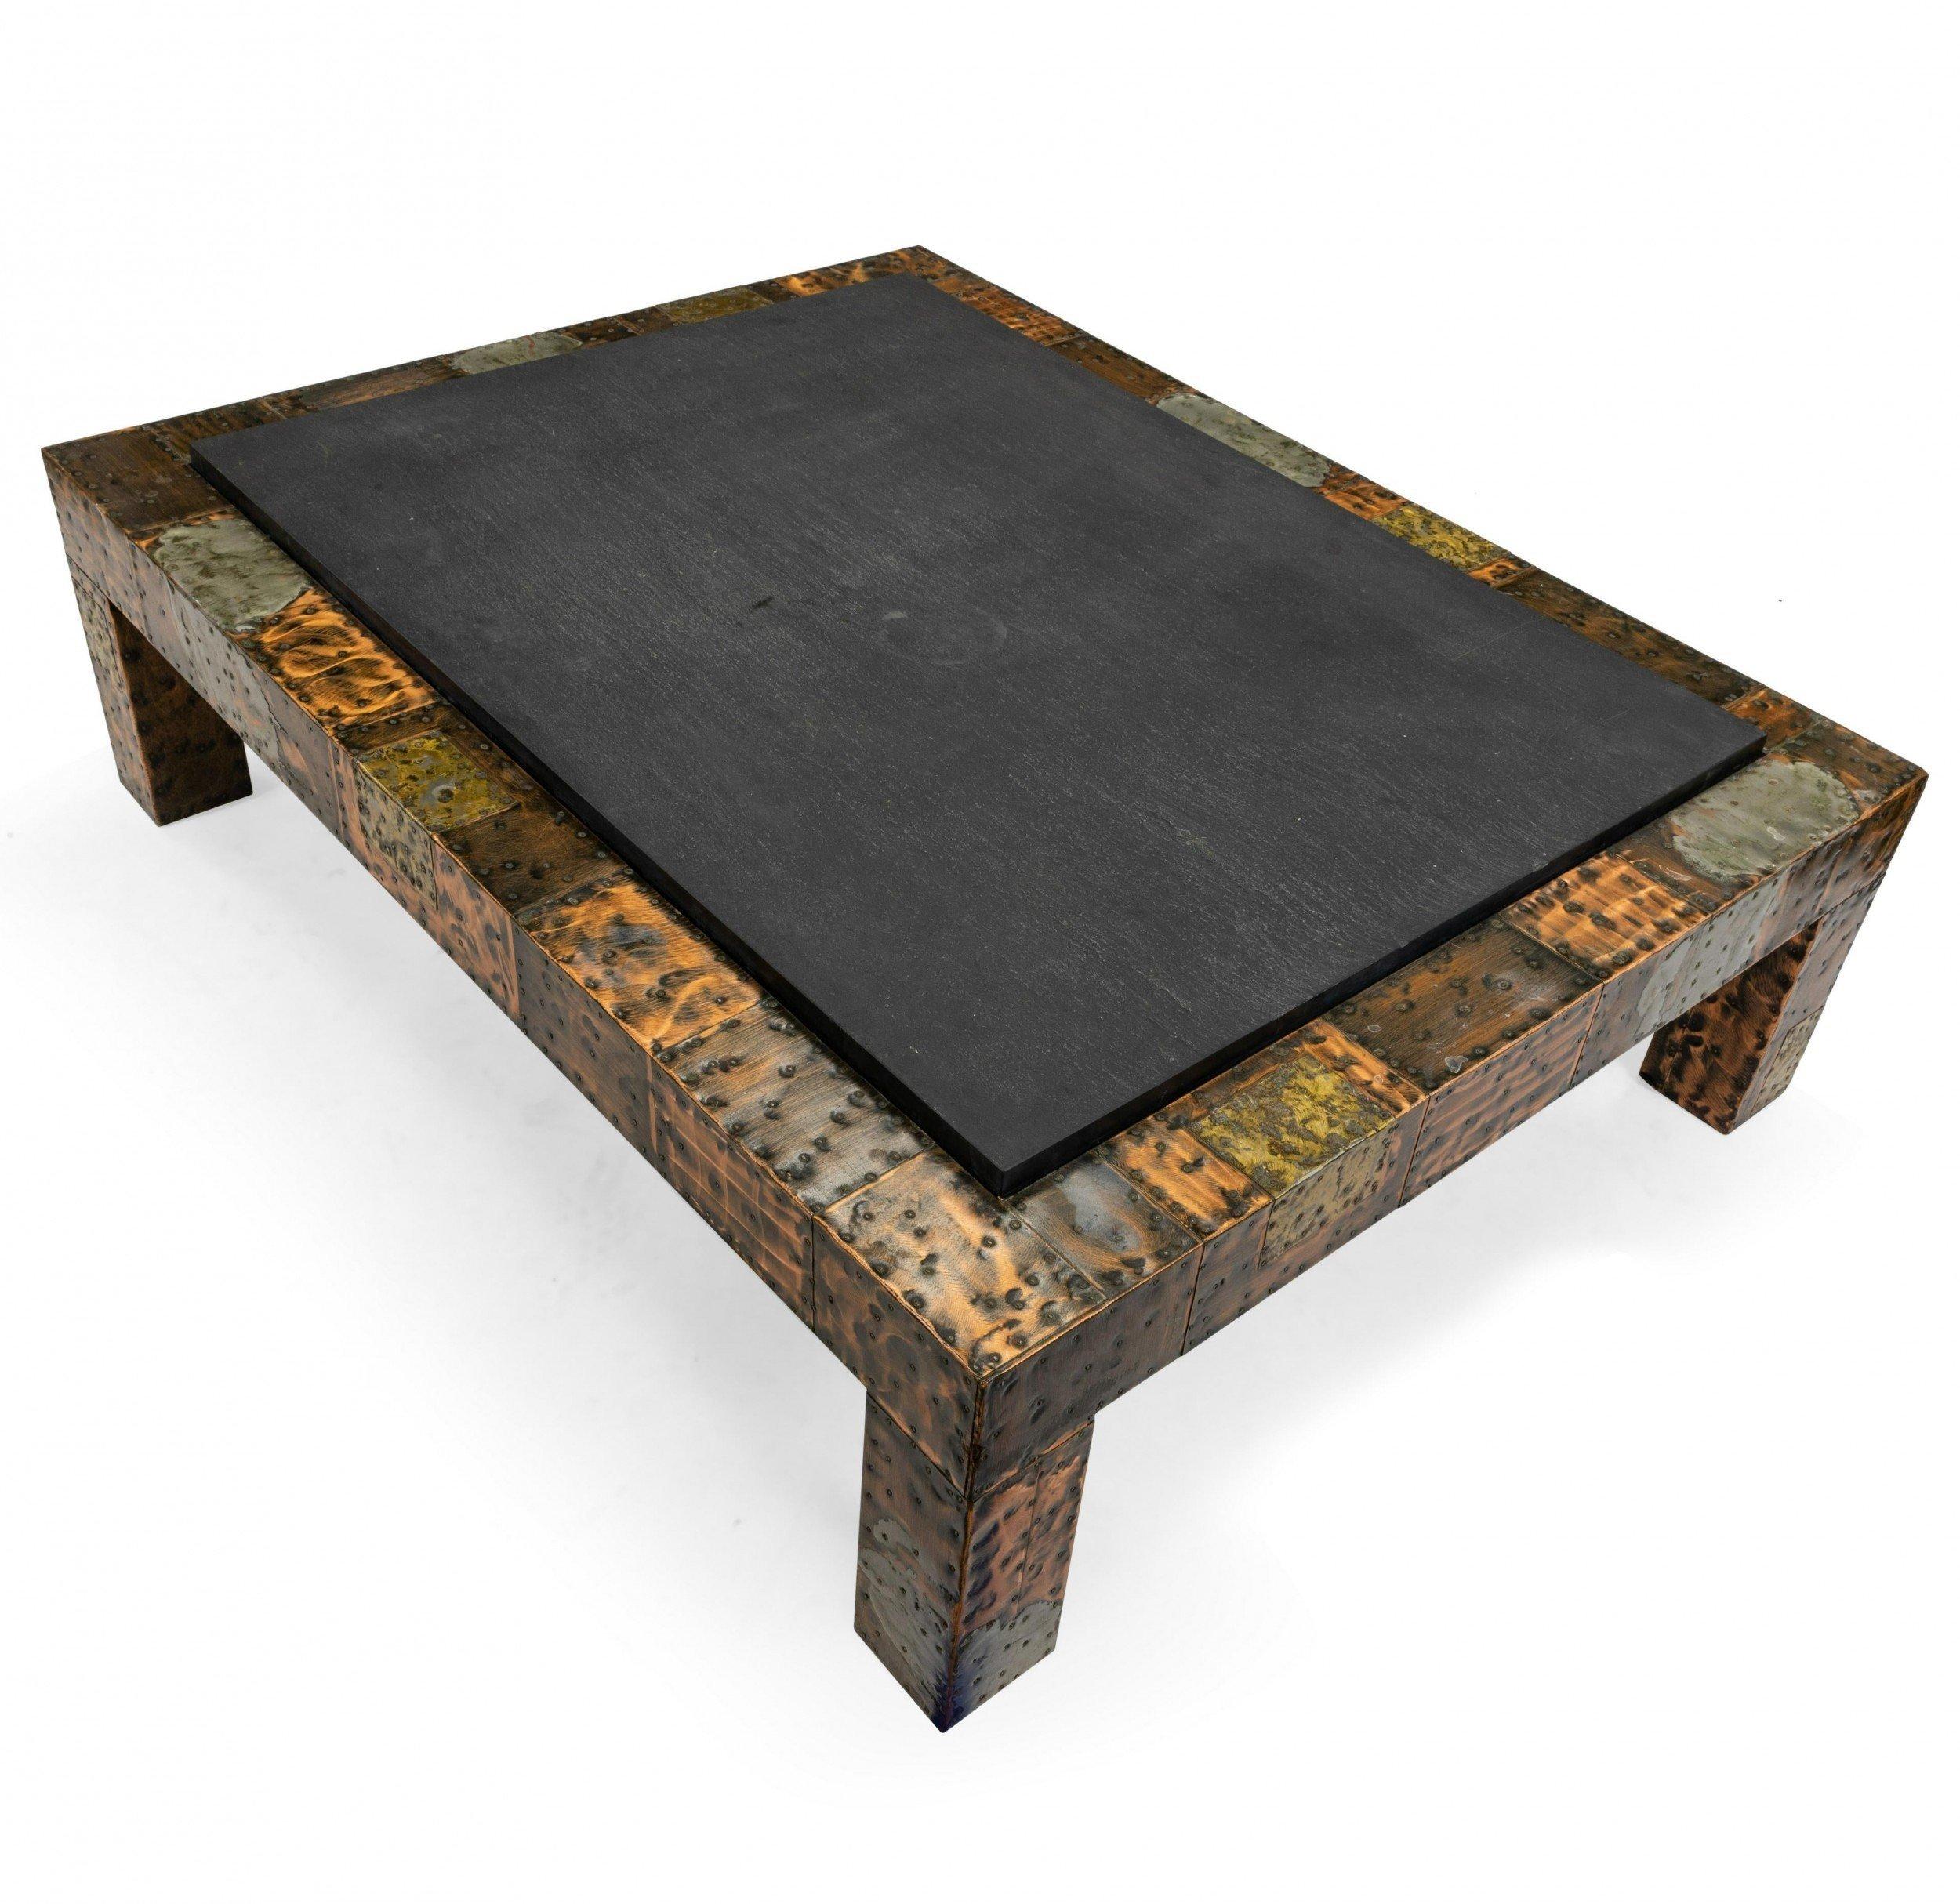 Brutalist American Modern 1970s Paul Evans for Directional patinated patchwork metal coffee table with riveted copper, brass, and pewter sheeting with slate top.